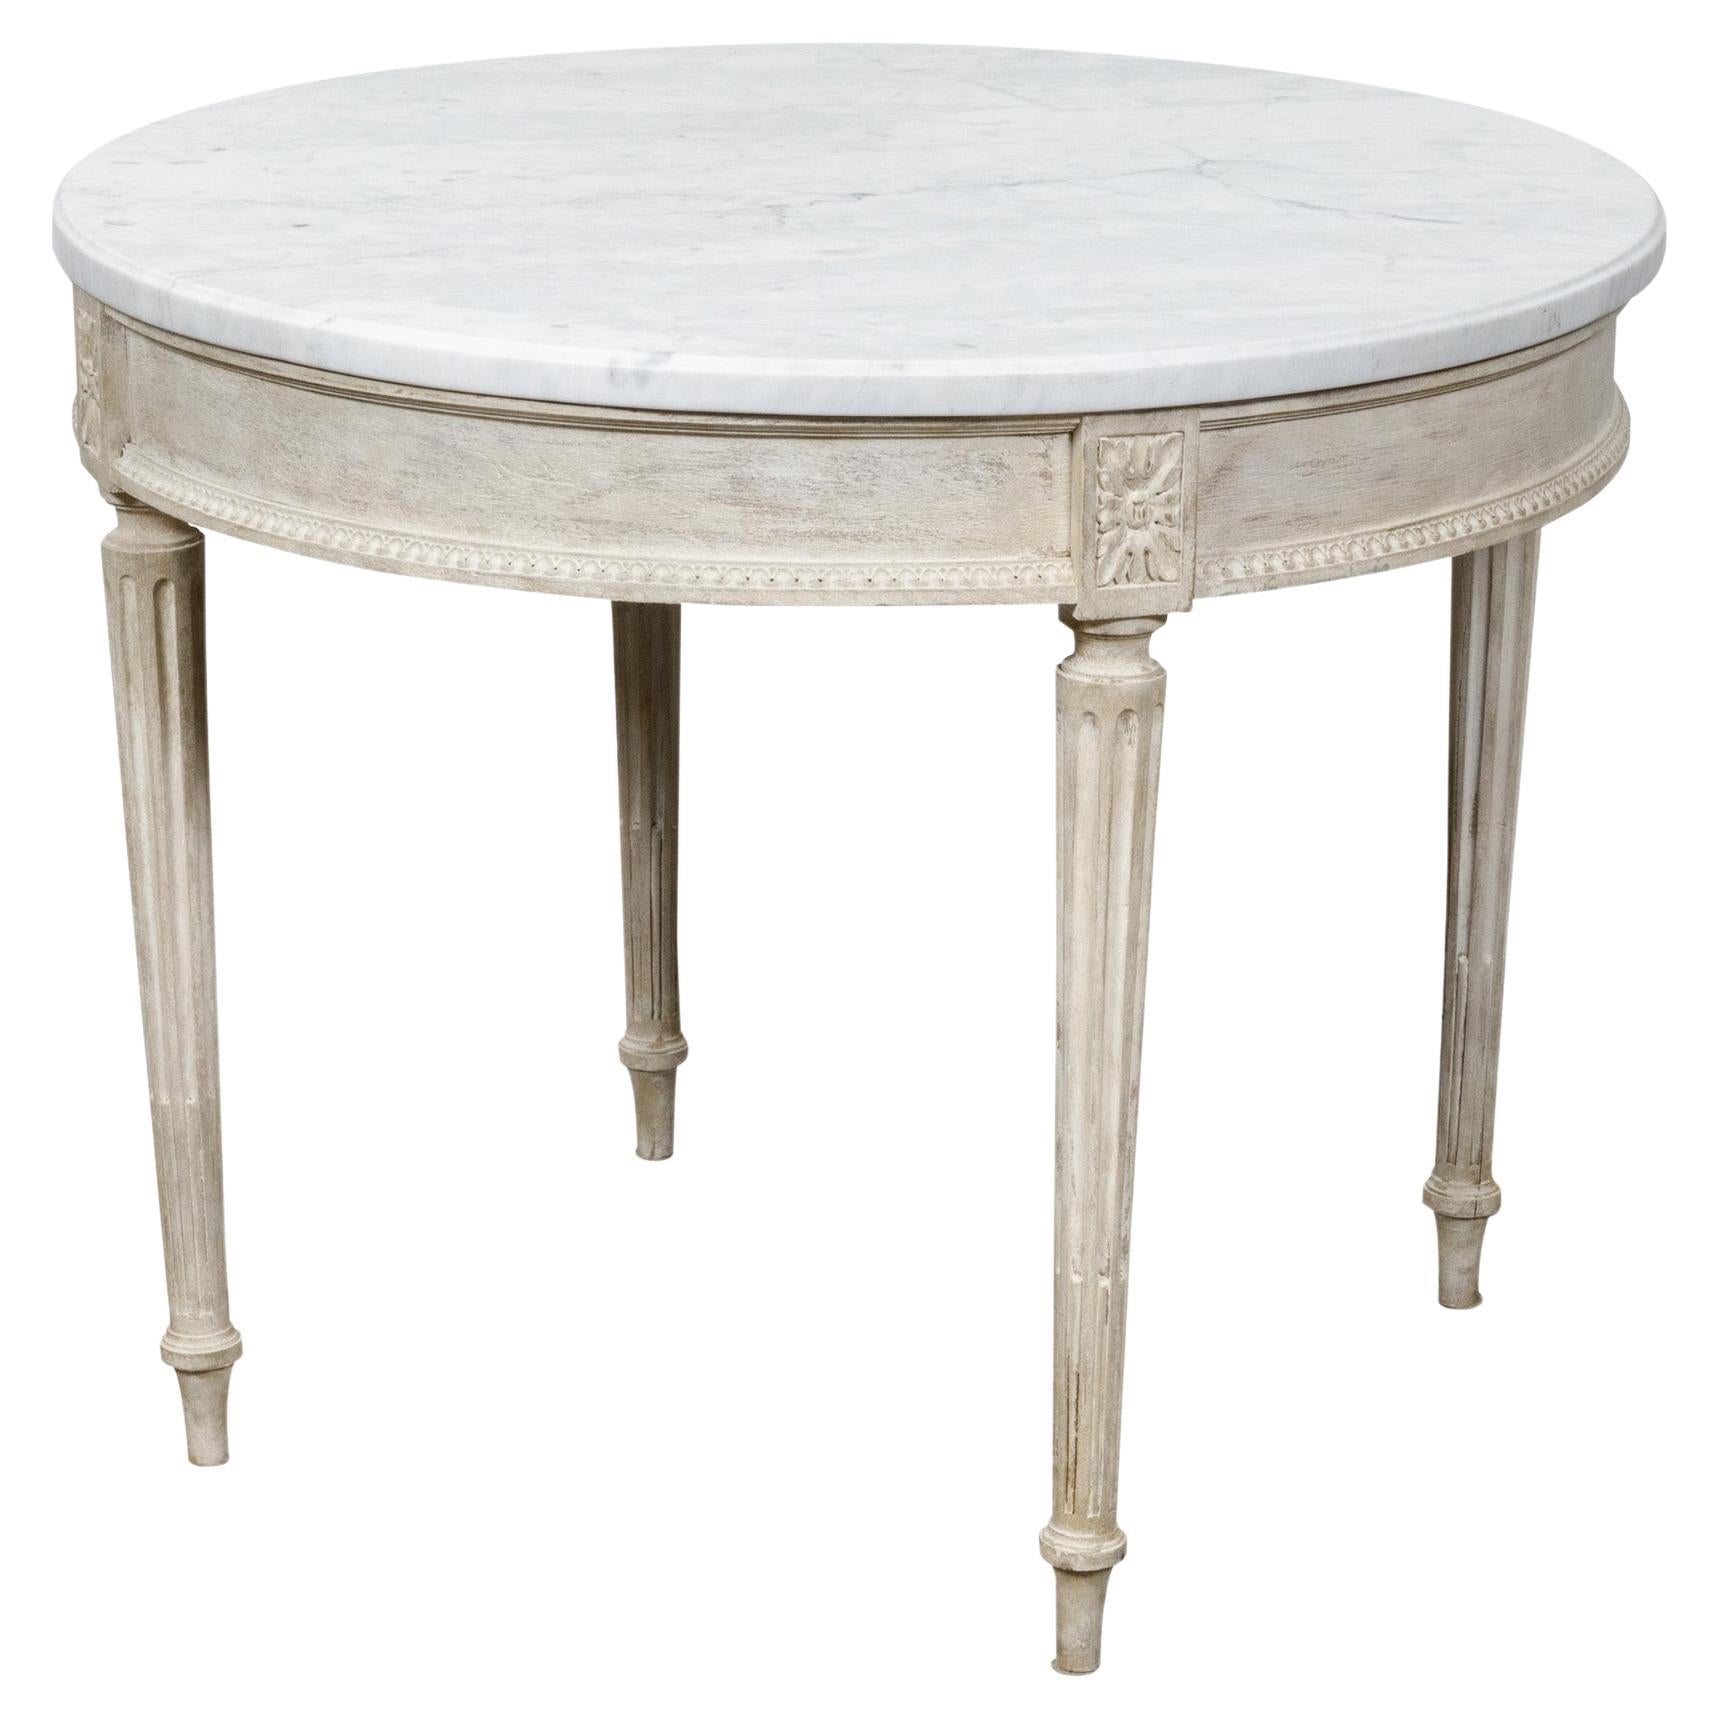 French Louis XVI Style 19th Century Center Table with Round White Marble Top For Sale